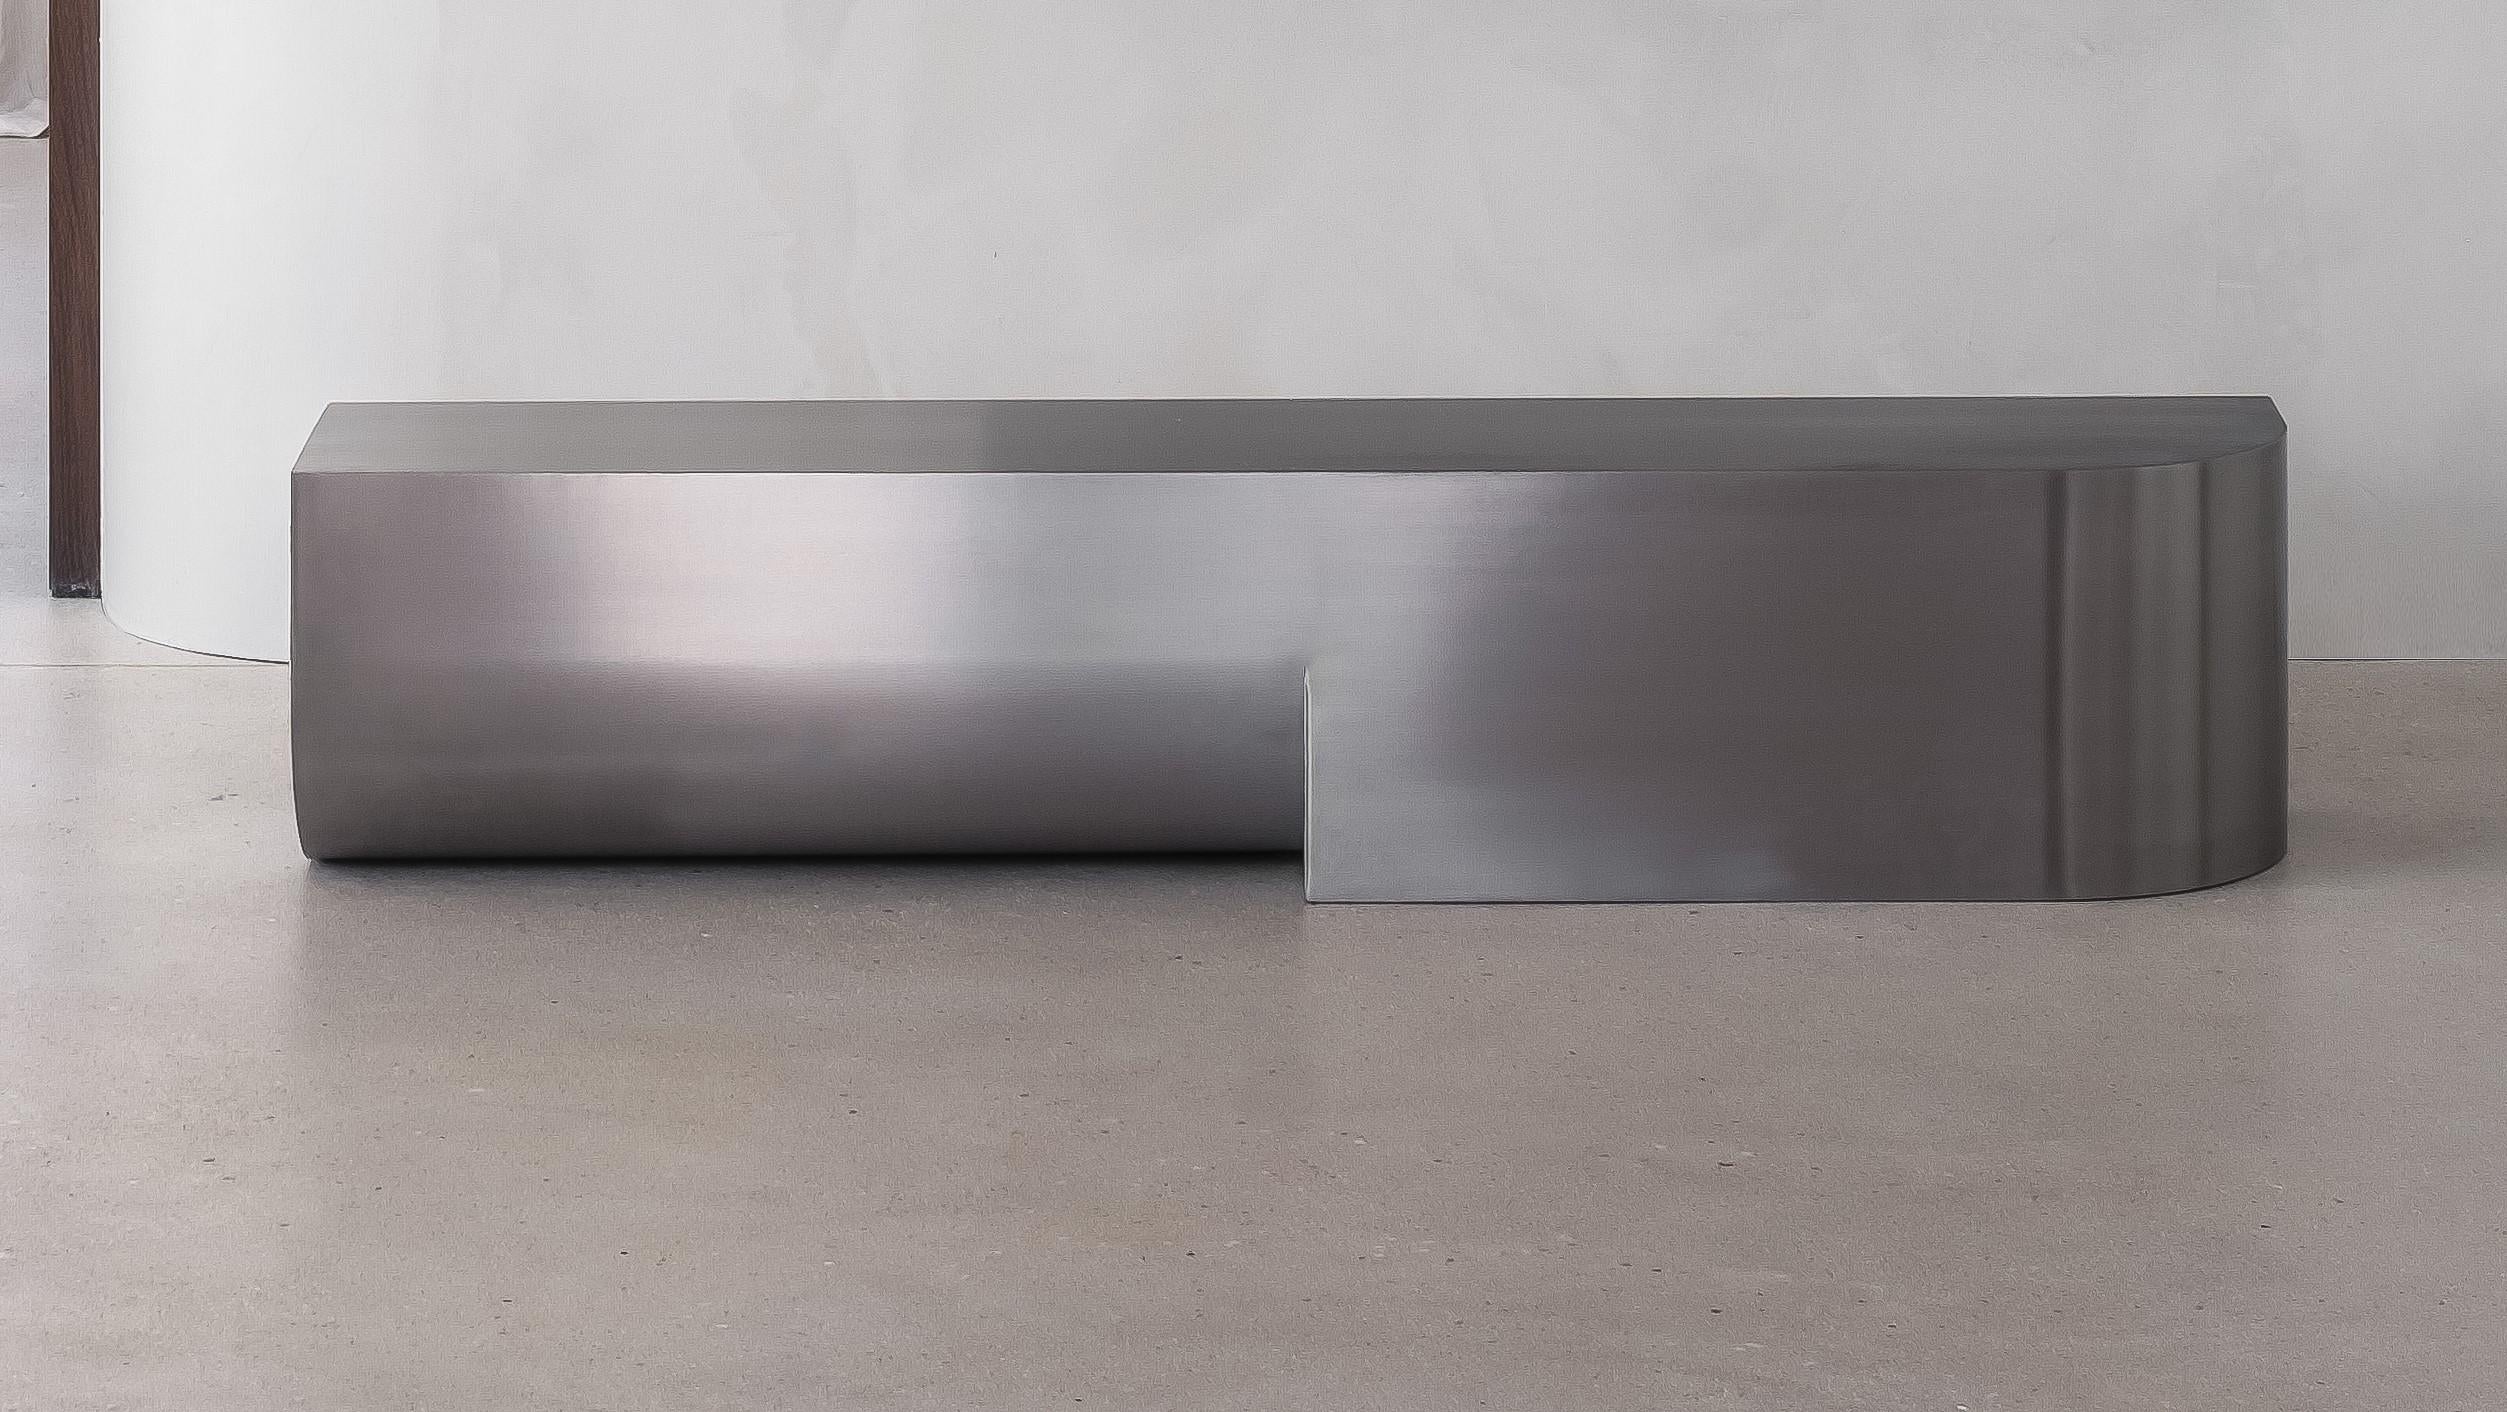 Undum Bench by ​HADGE
Dimensions: D 32 x W 150 x H 32 cm.
Materials: Brushed stainless steel.
Also available in different materials.

A cohesion of simplified curved shapes in different directions reflects the passage of passing by and reflects the